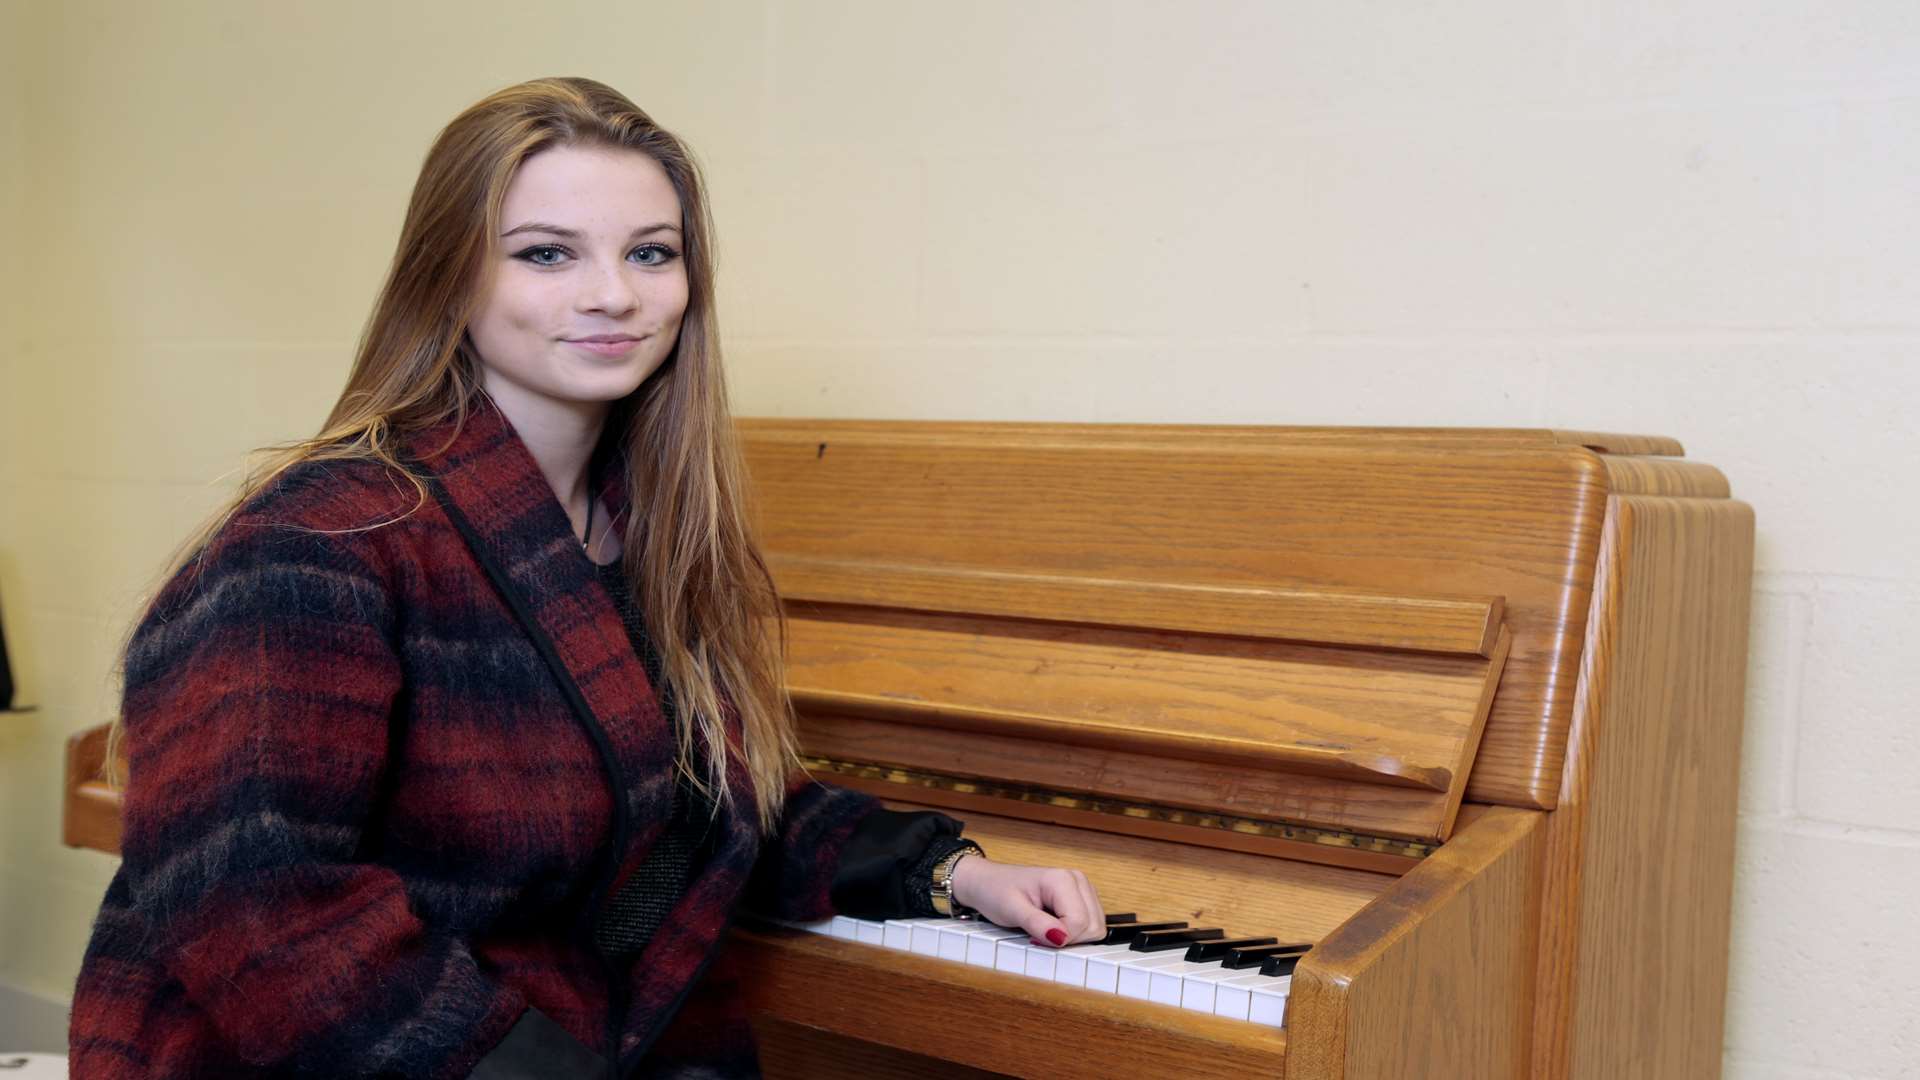 Emily is a pupil at Cranbrook School. Picture: Martin Apps